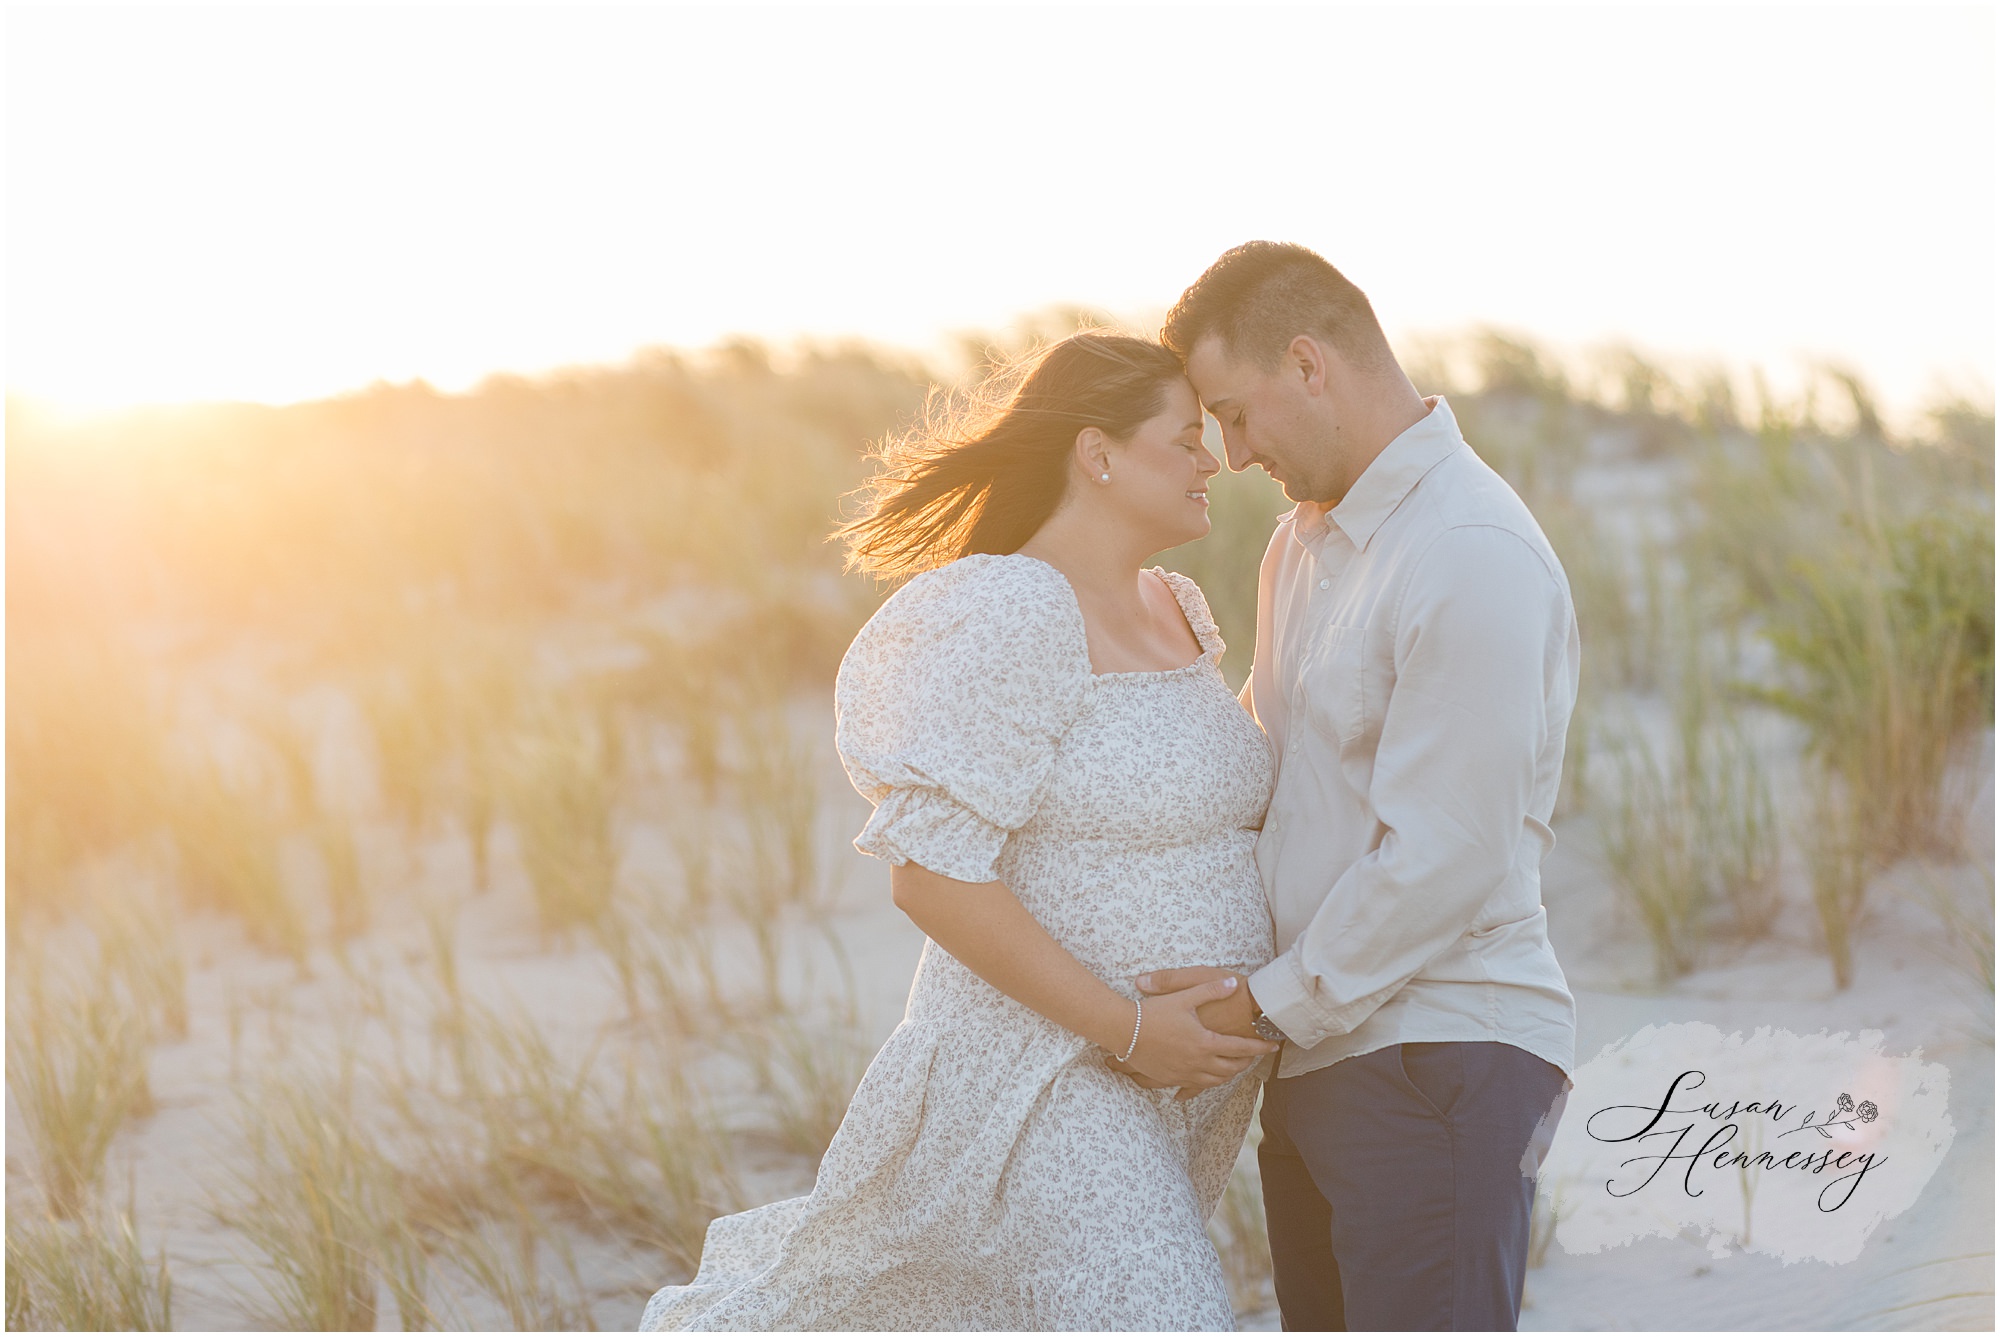 Sunset Beach Maternity Session photographed by Susan Hennessey Photography, South Jersey newborn photographer